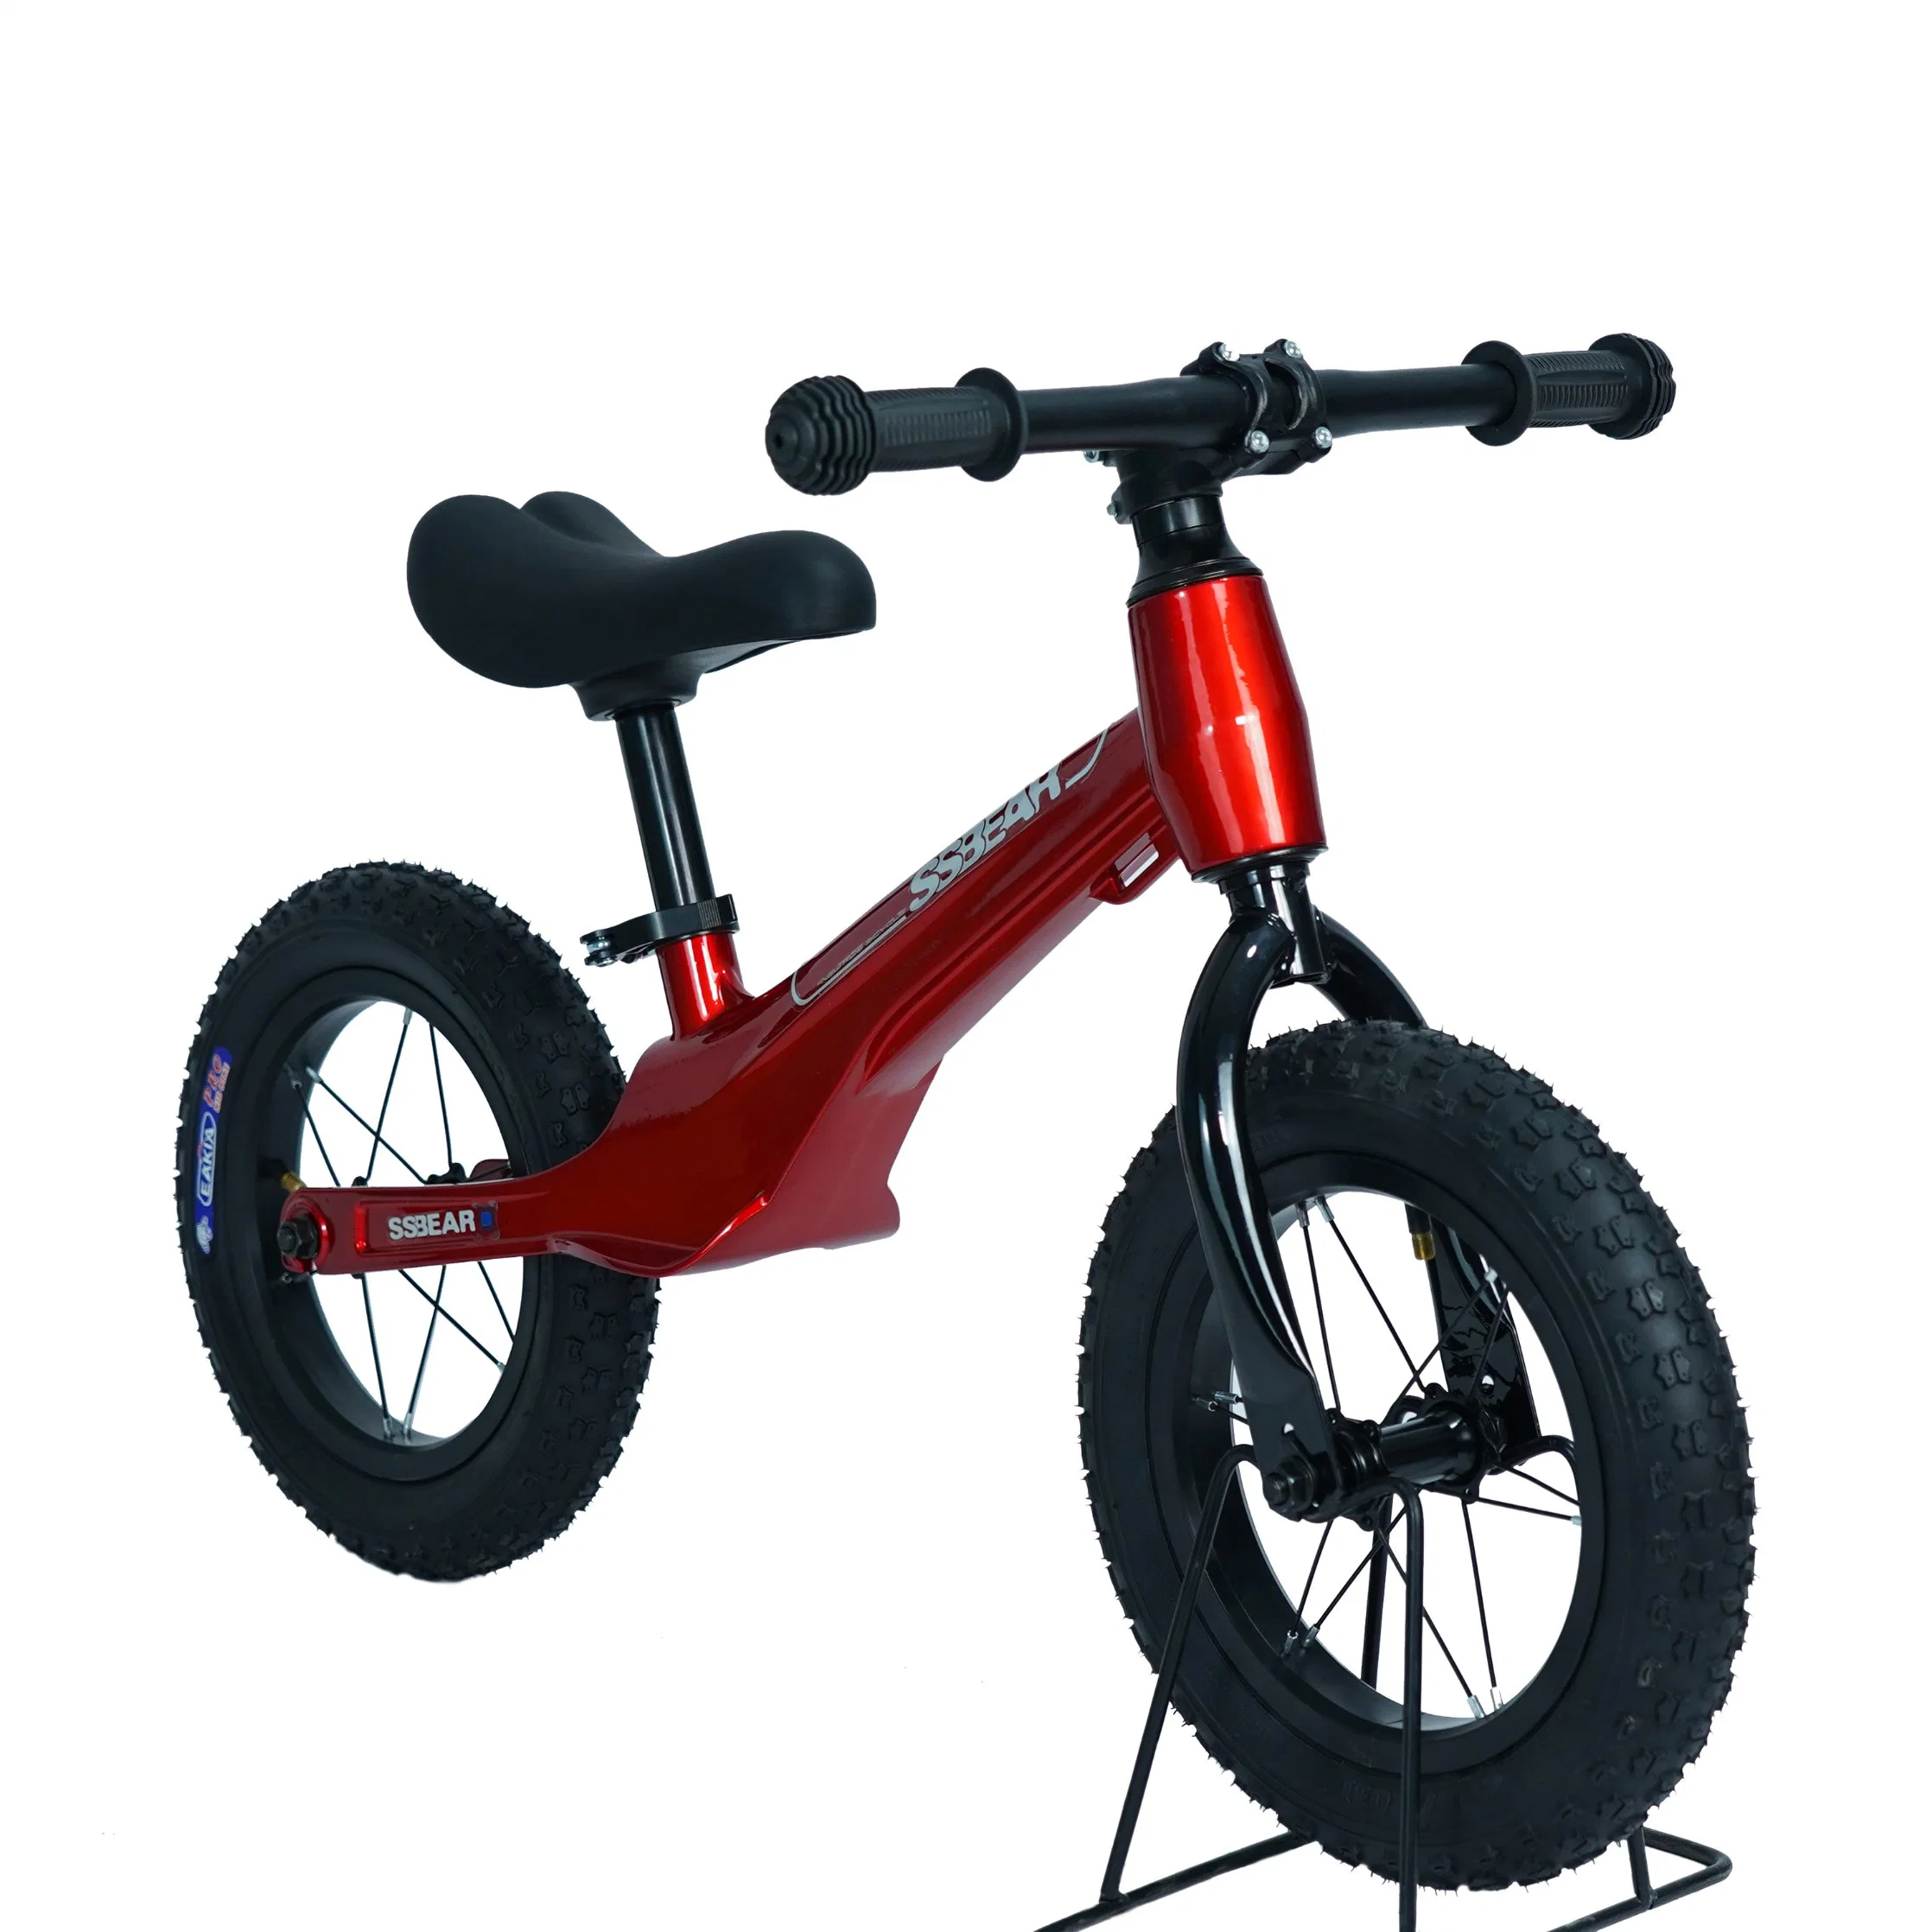 Factory Price Kids Blance Bike Toddler Bike Baby Ride on Toy for Kids 1-6 Years Old